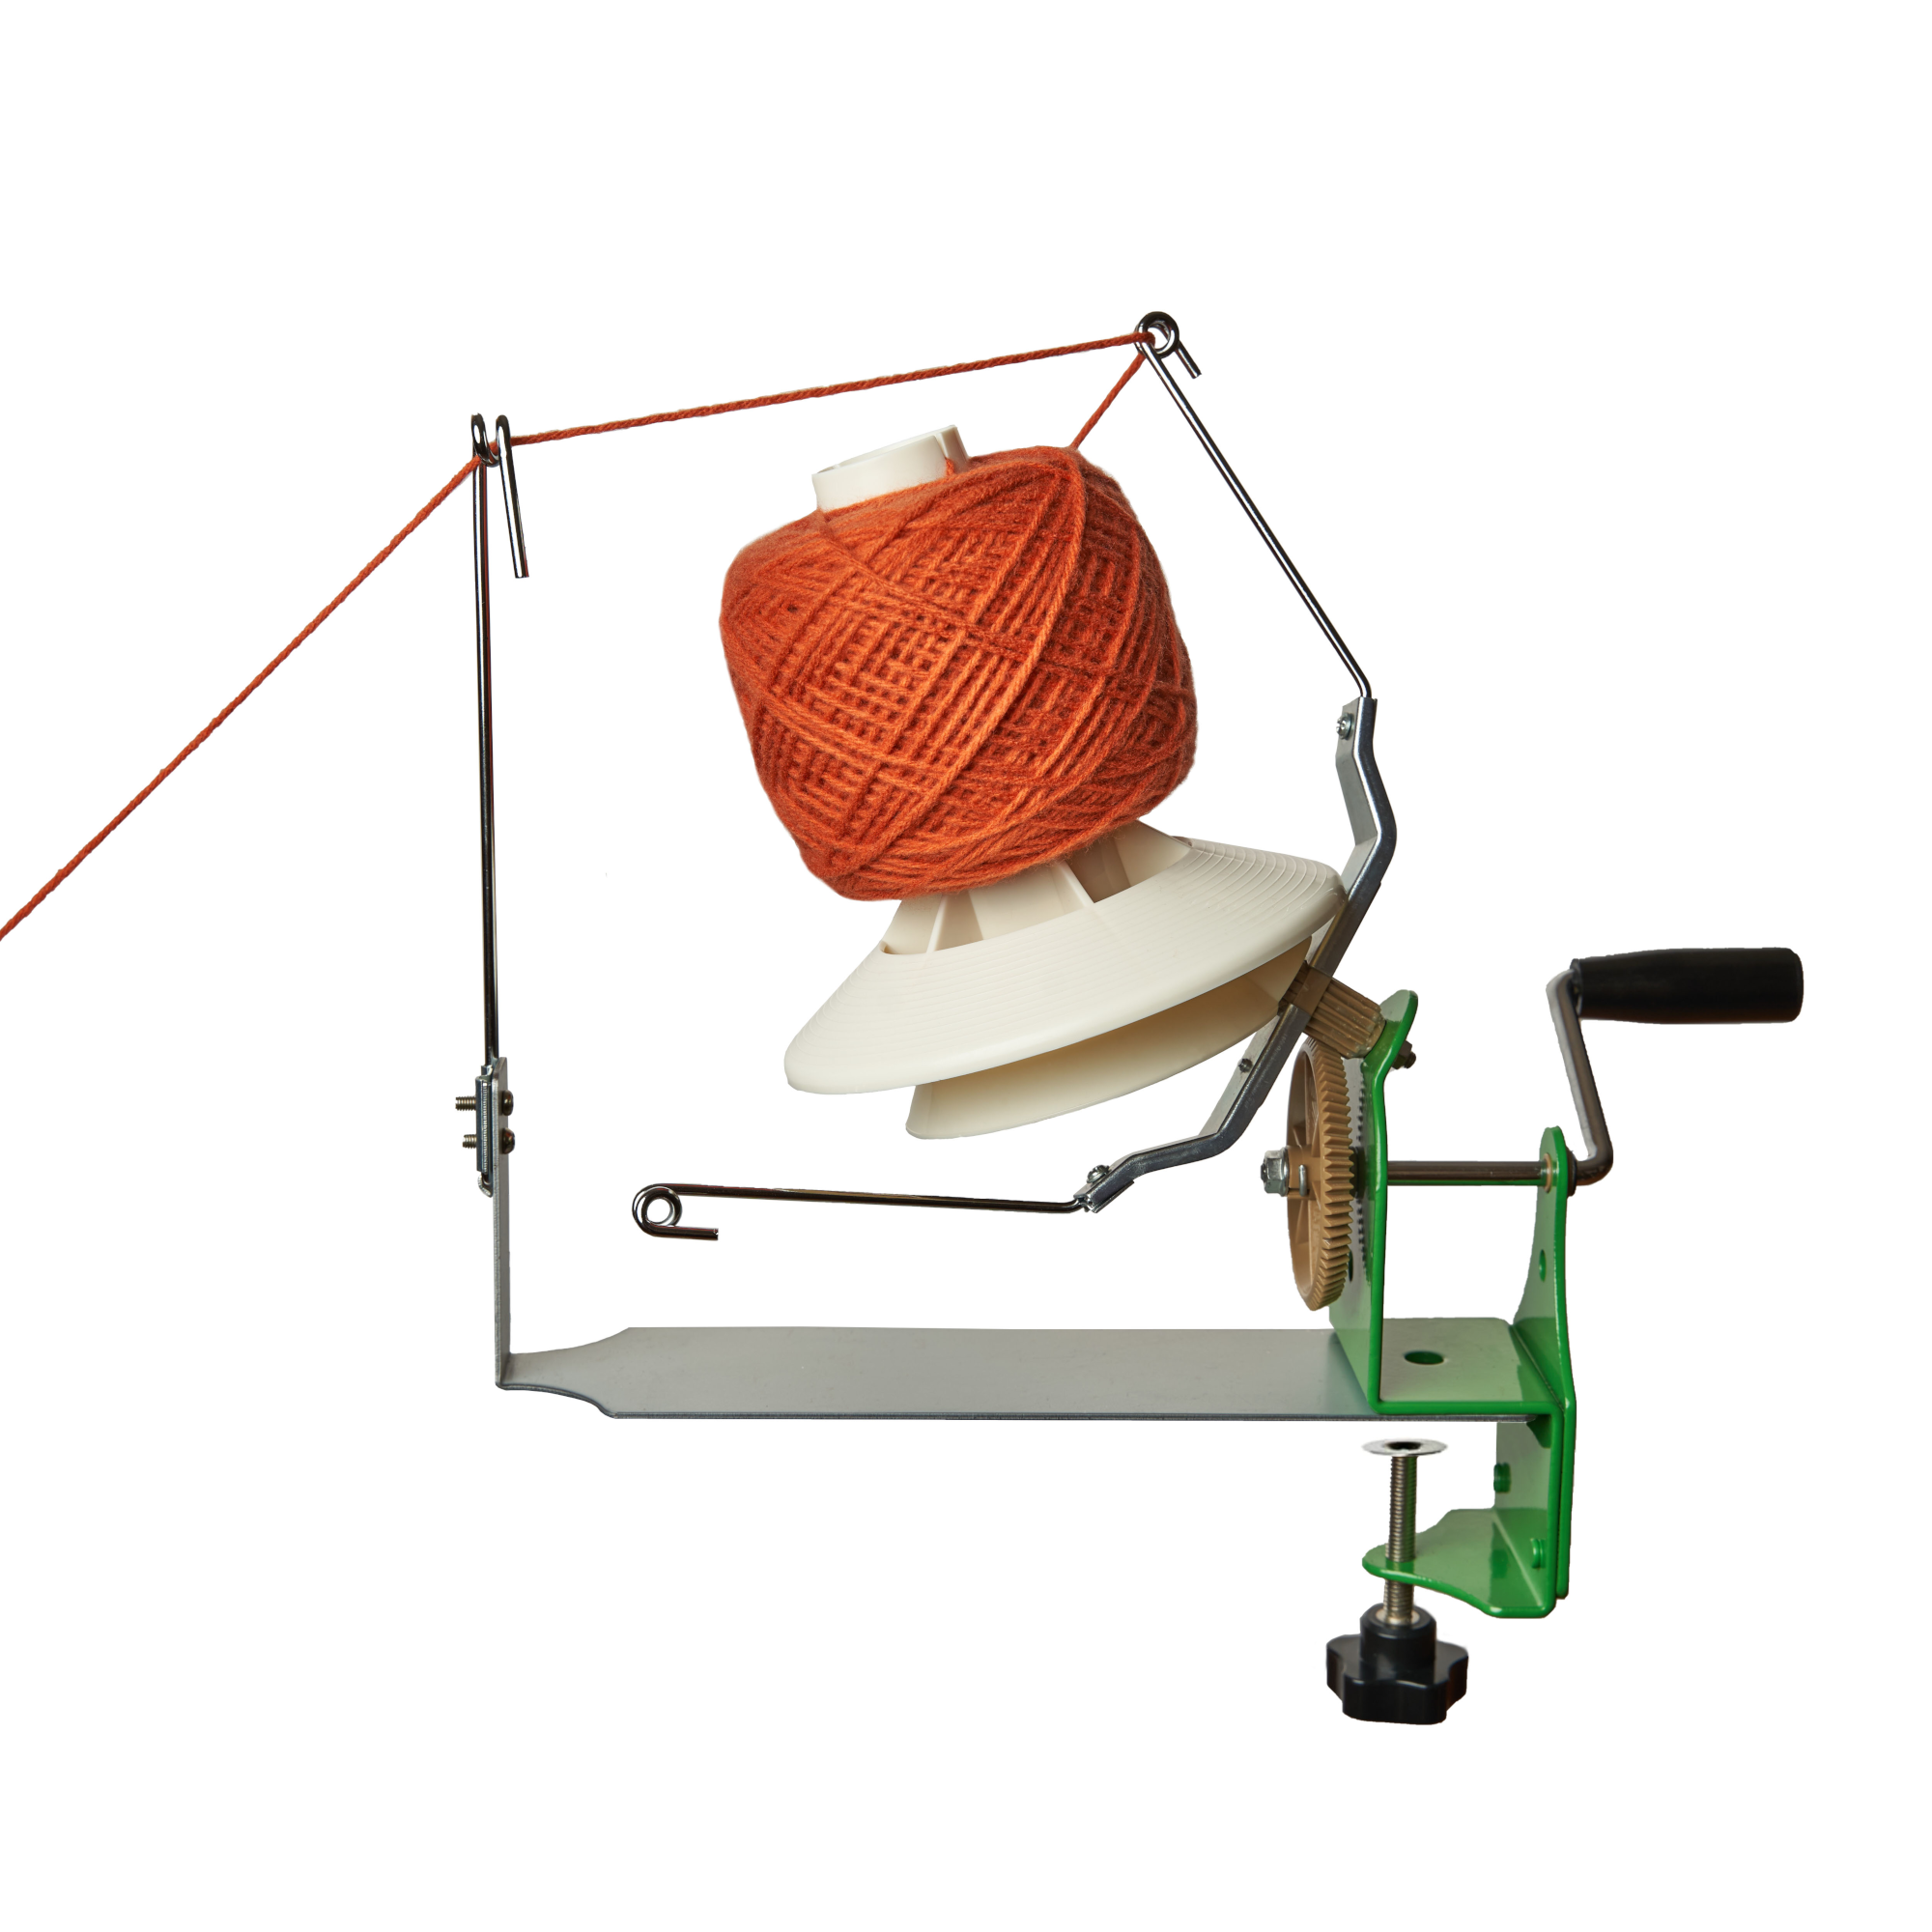 Wooden yarn winder with screw clamp.